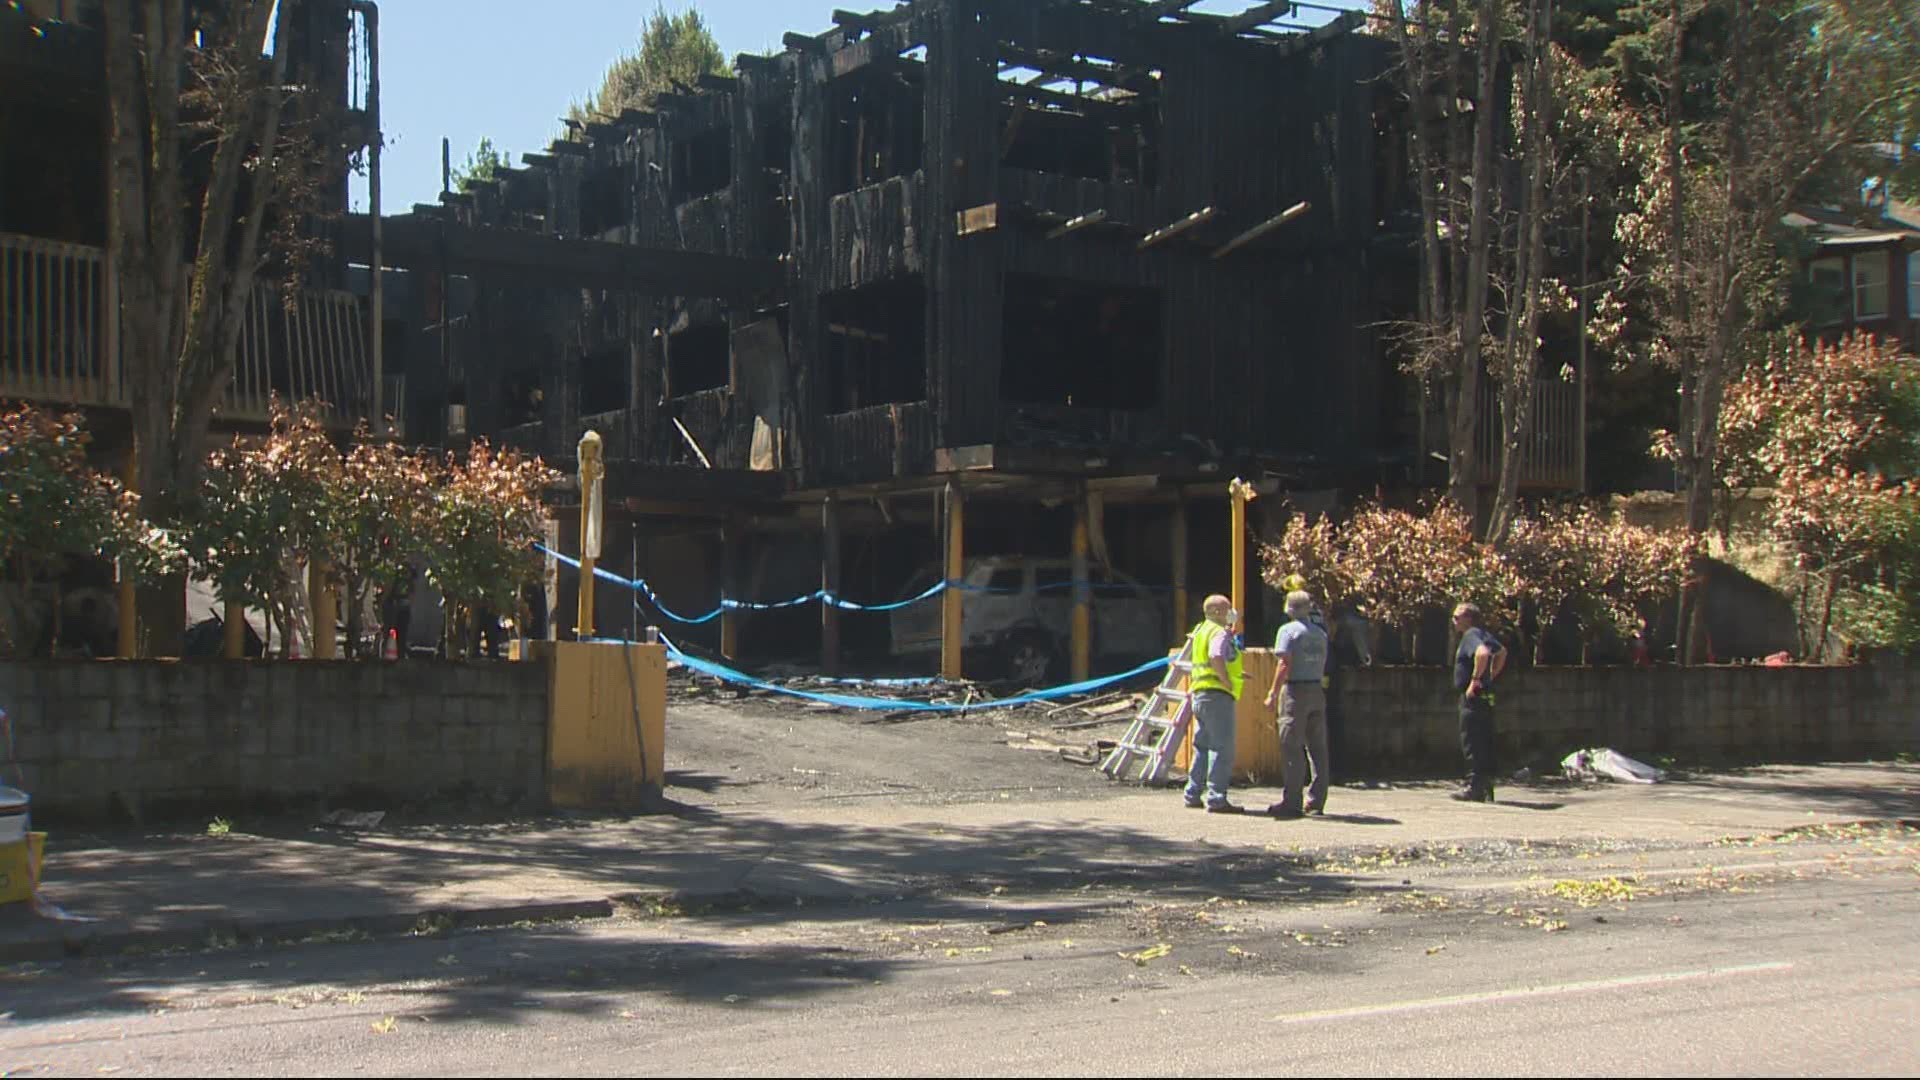 The local community is stepping up to help after a deadly fire in a Portland apartment building on the Fourth of July. Tim Gordon explains how.